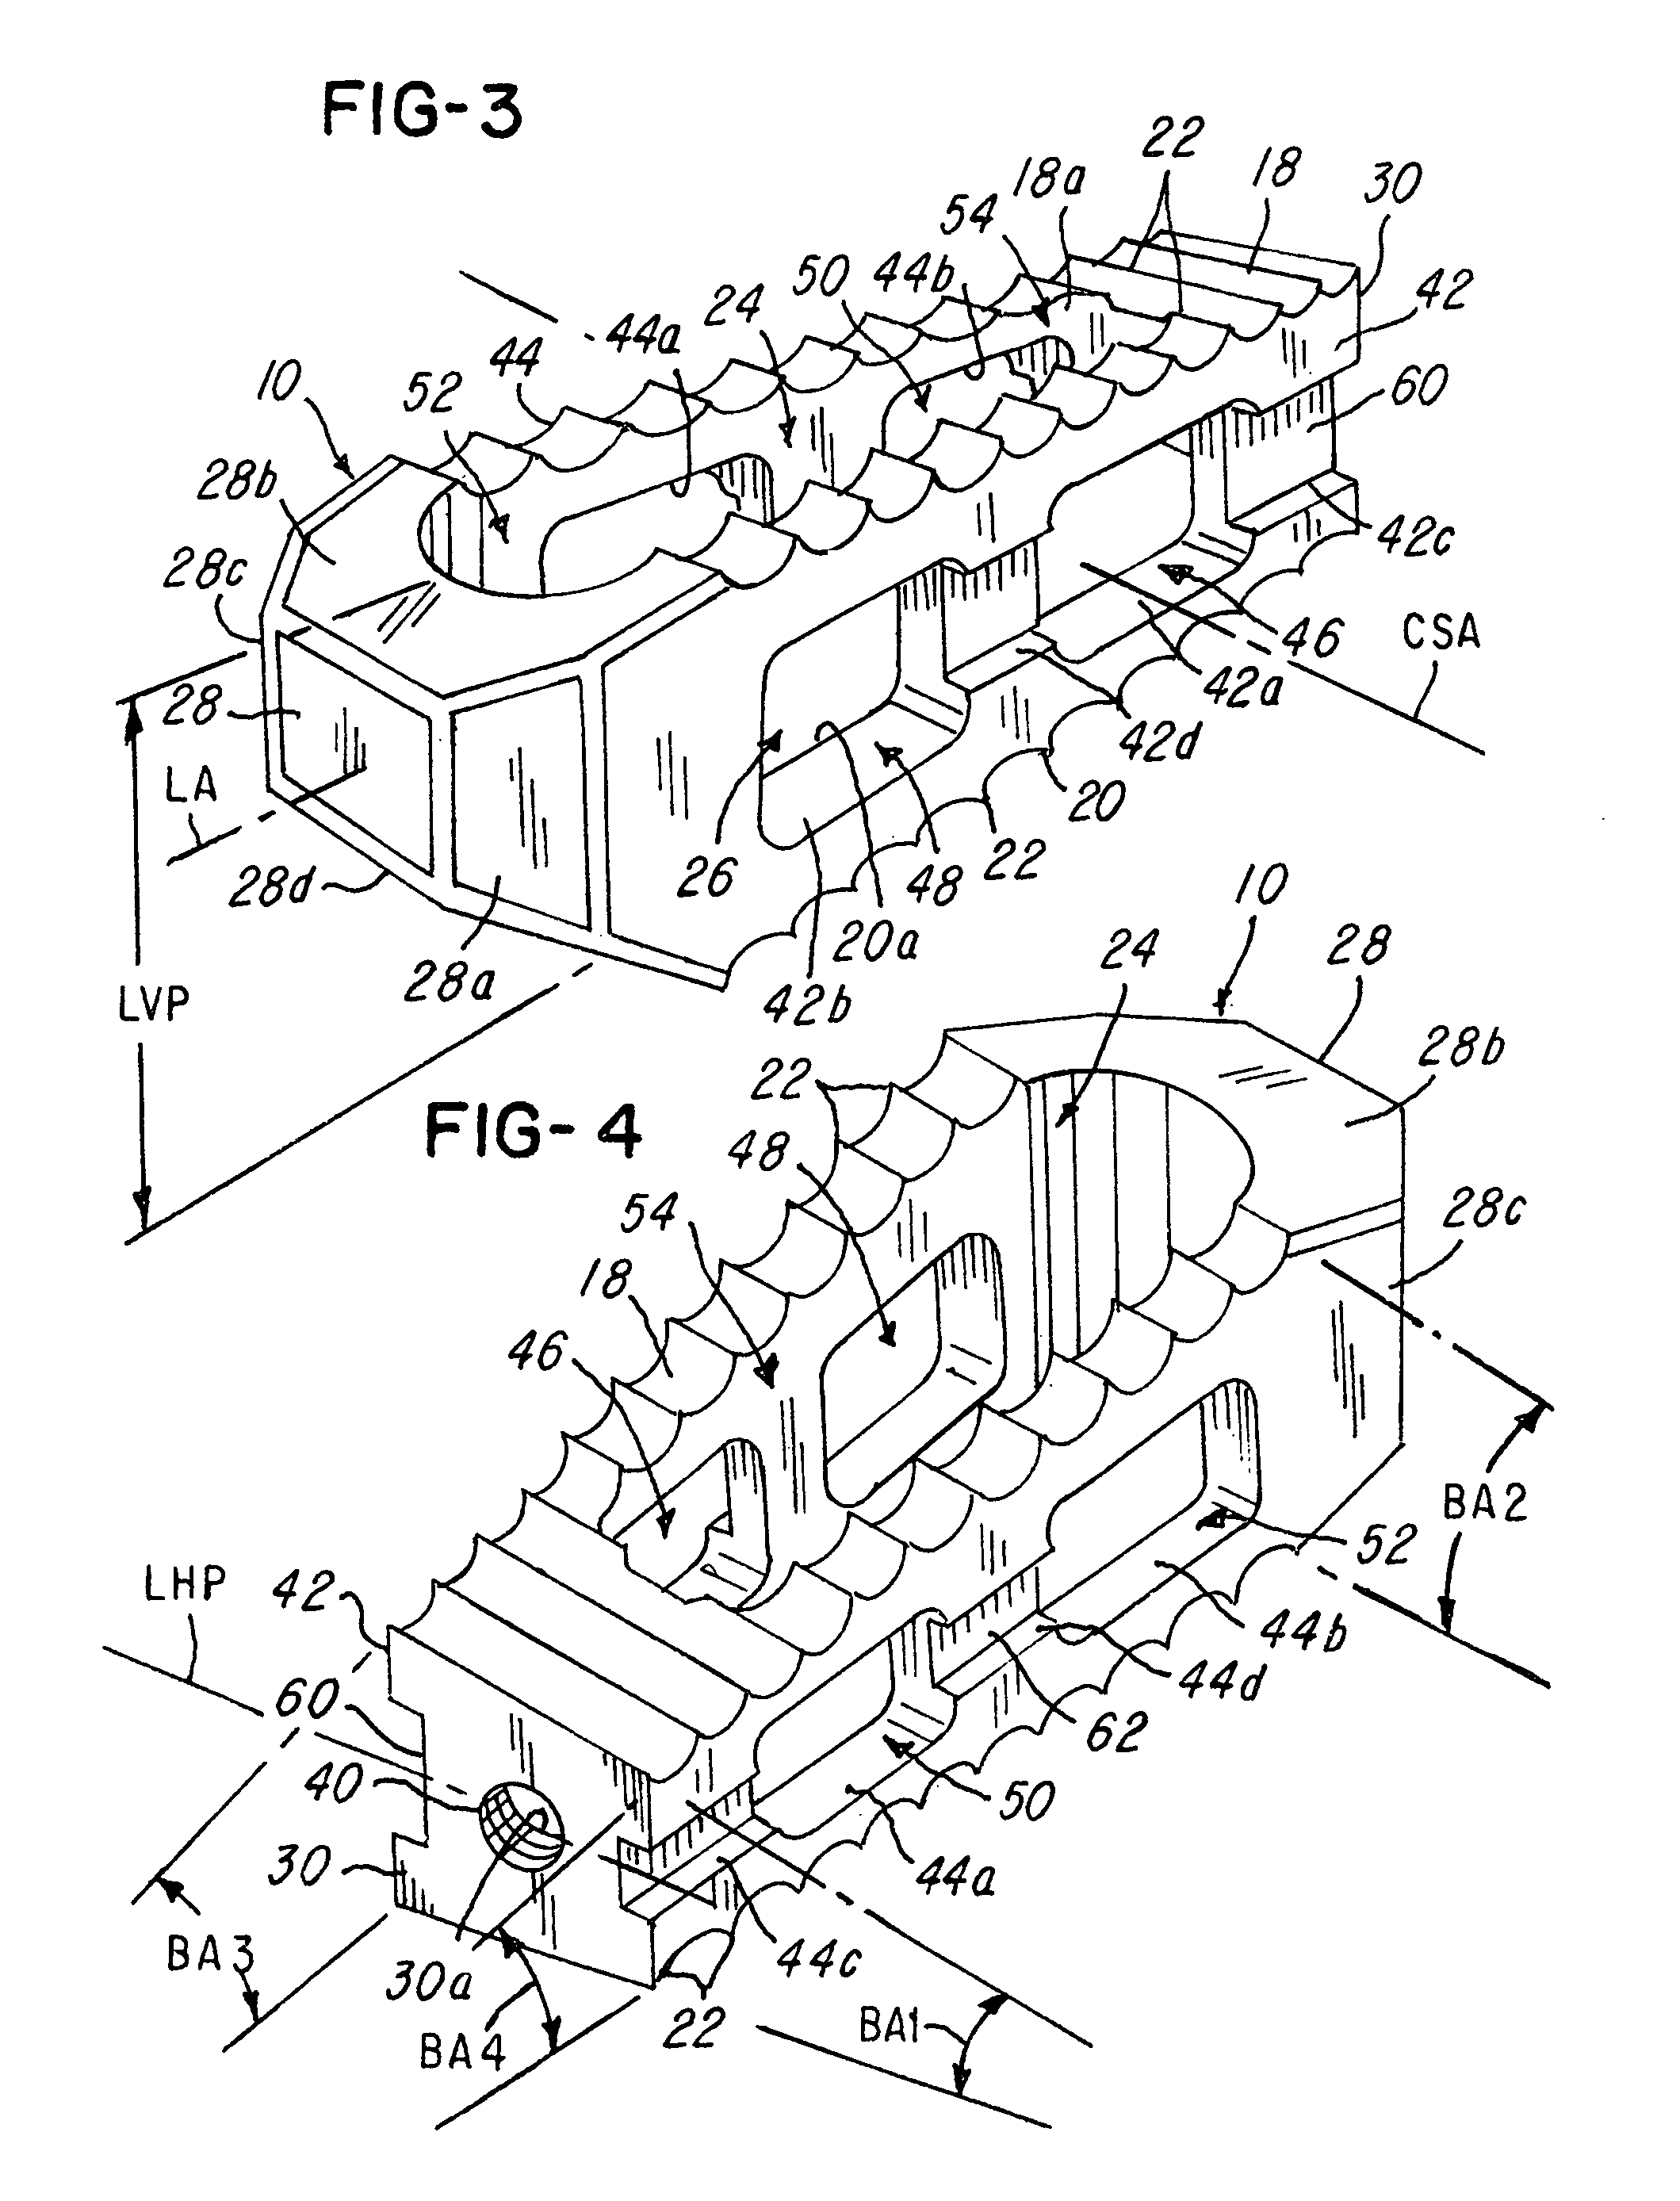 Prosthetic implant with biplanar angulation and compound angles